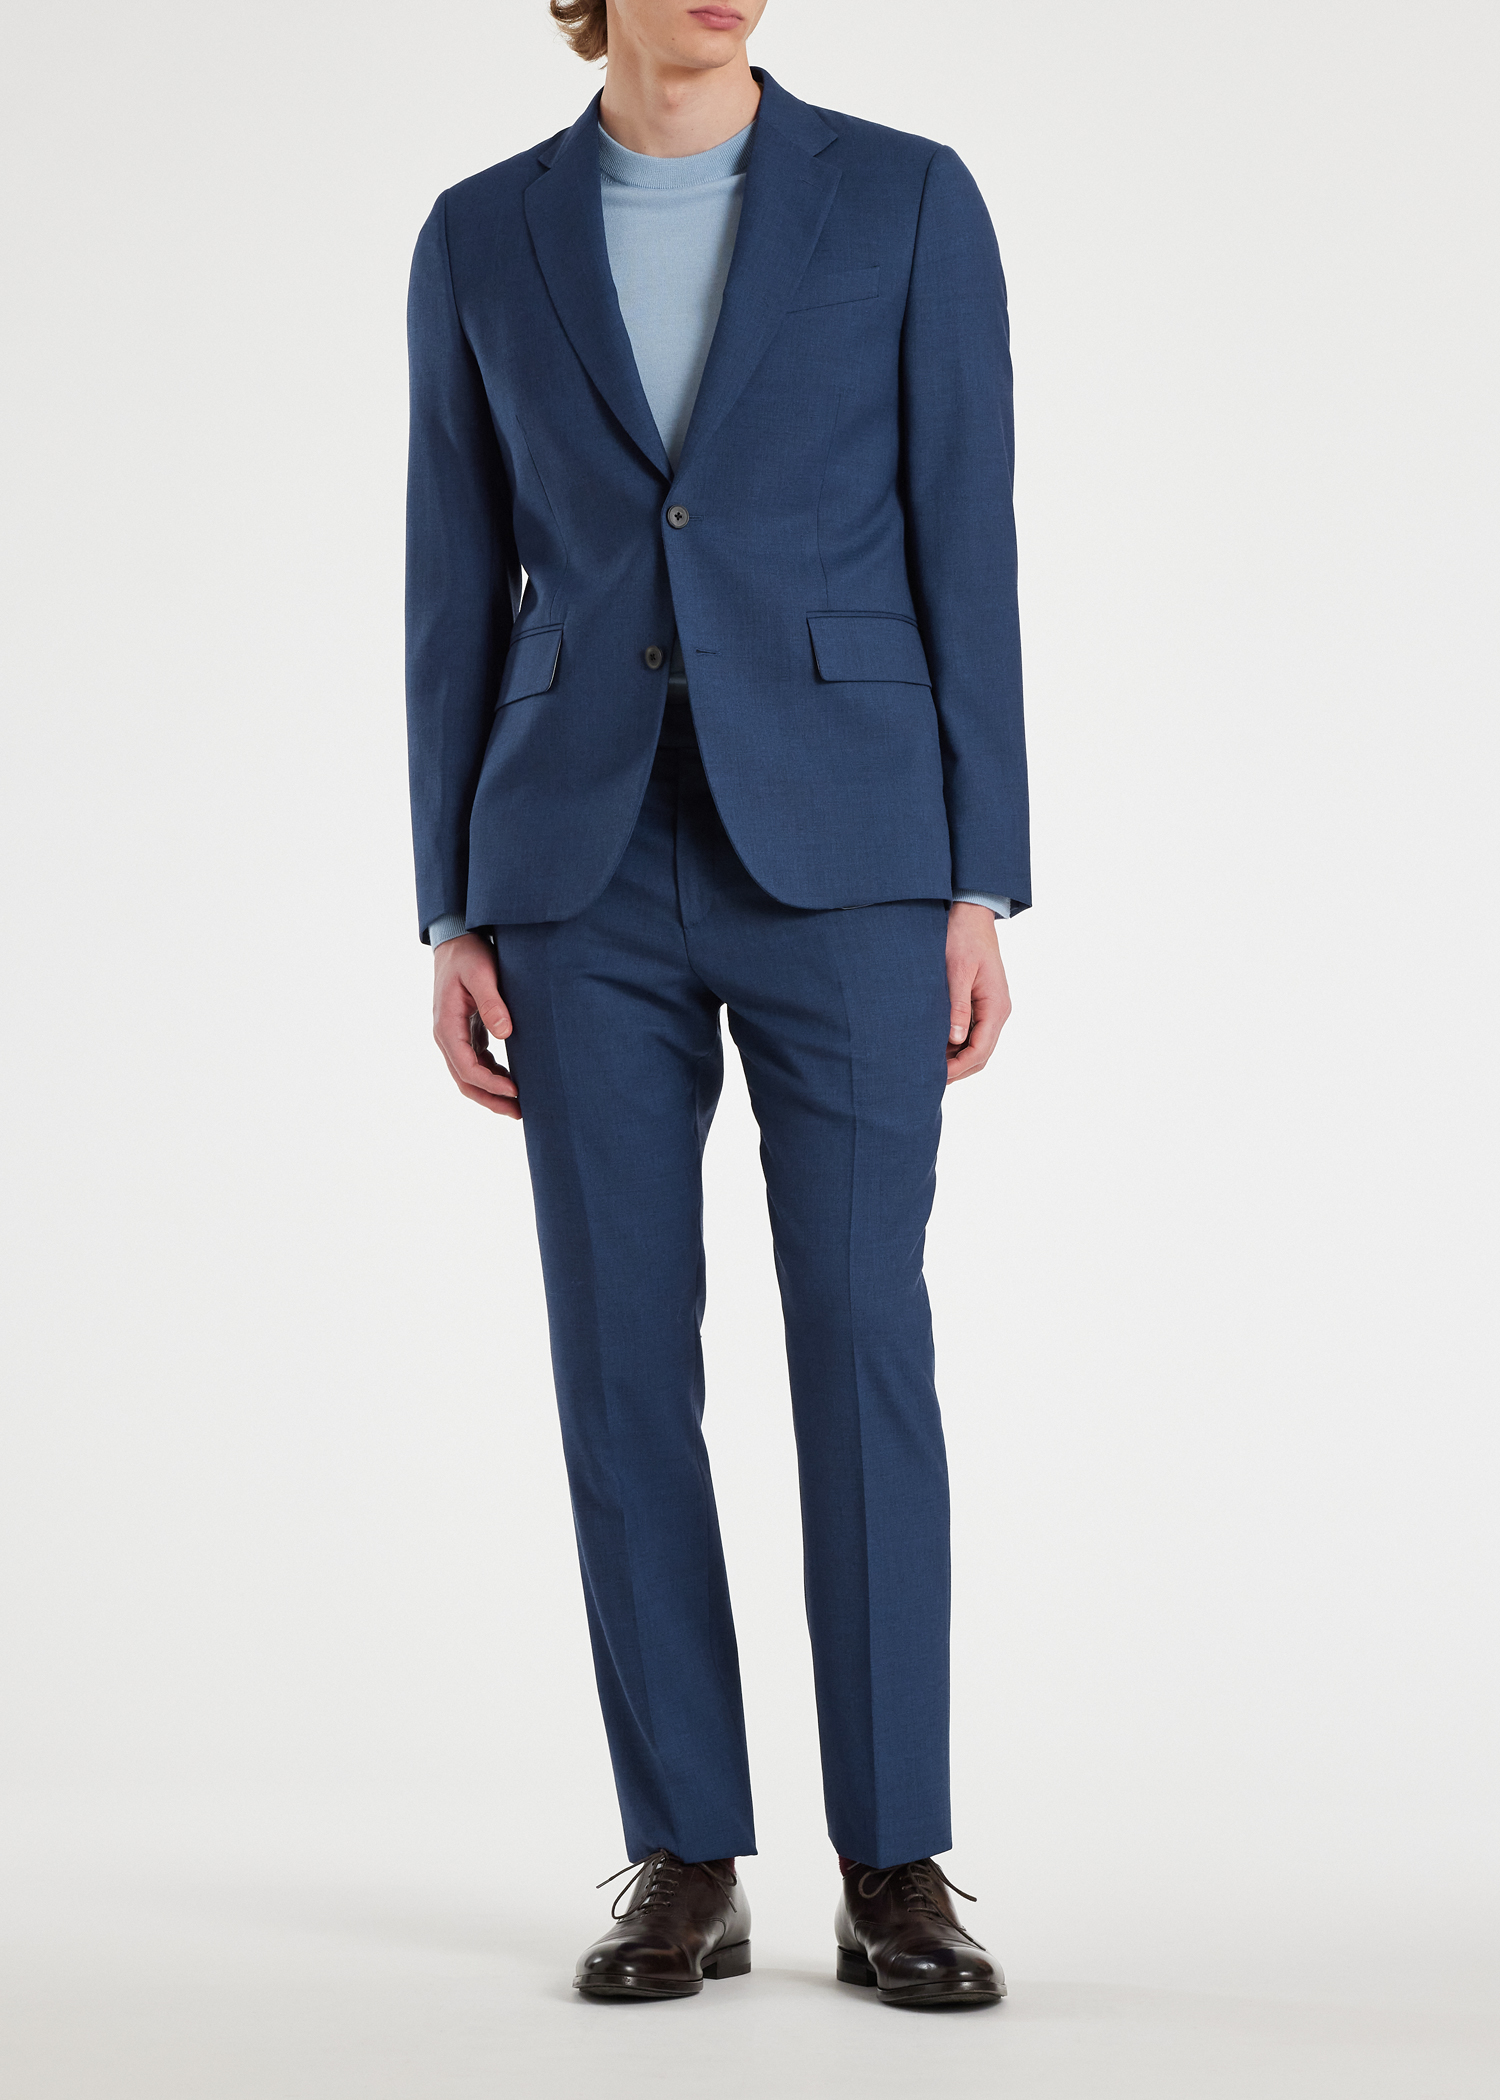 The Brierley - Men's Blue Wool 'A Suit To Travel In'